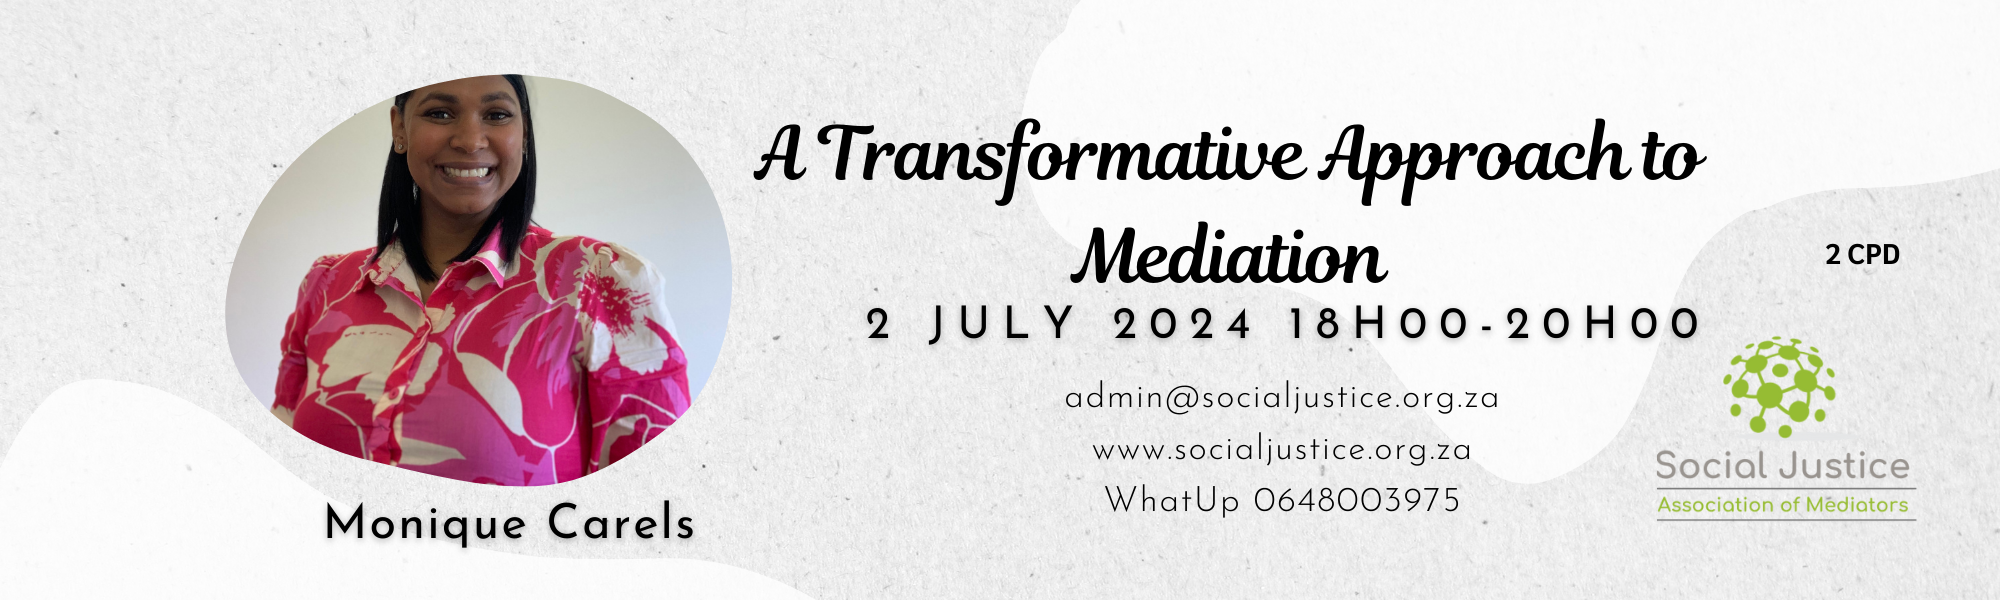 A discussion on the transformative approach to mediation